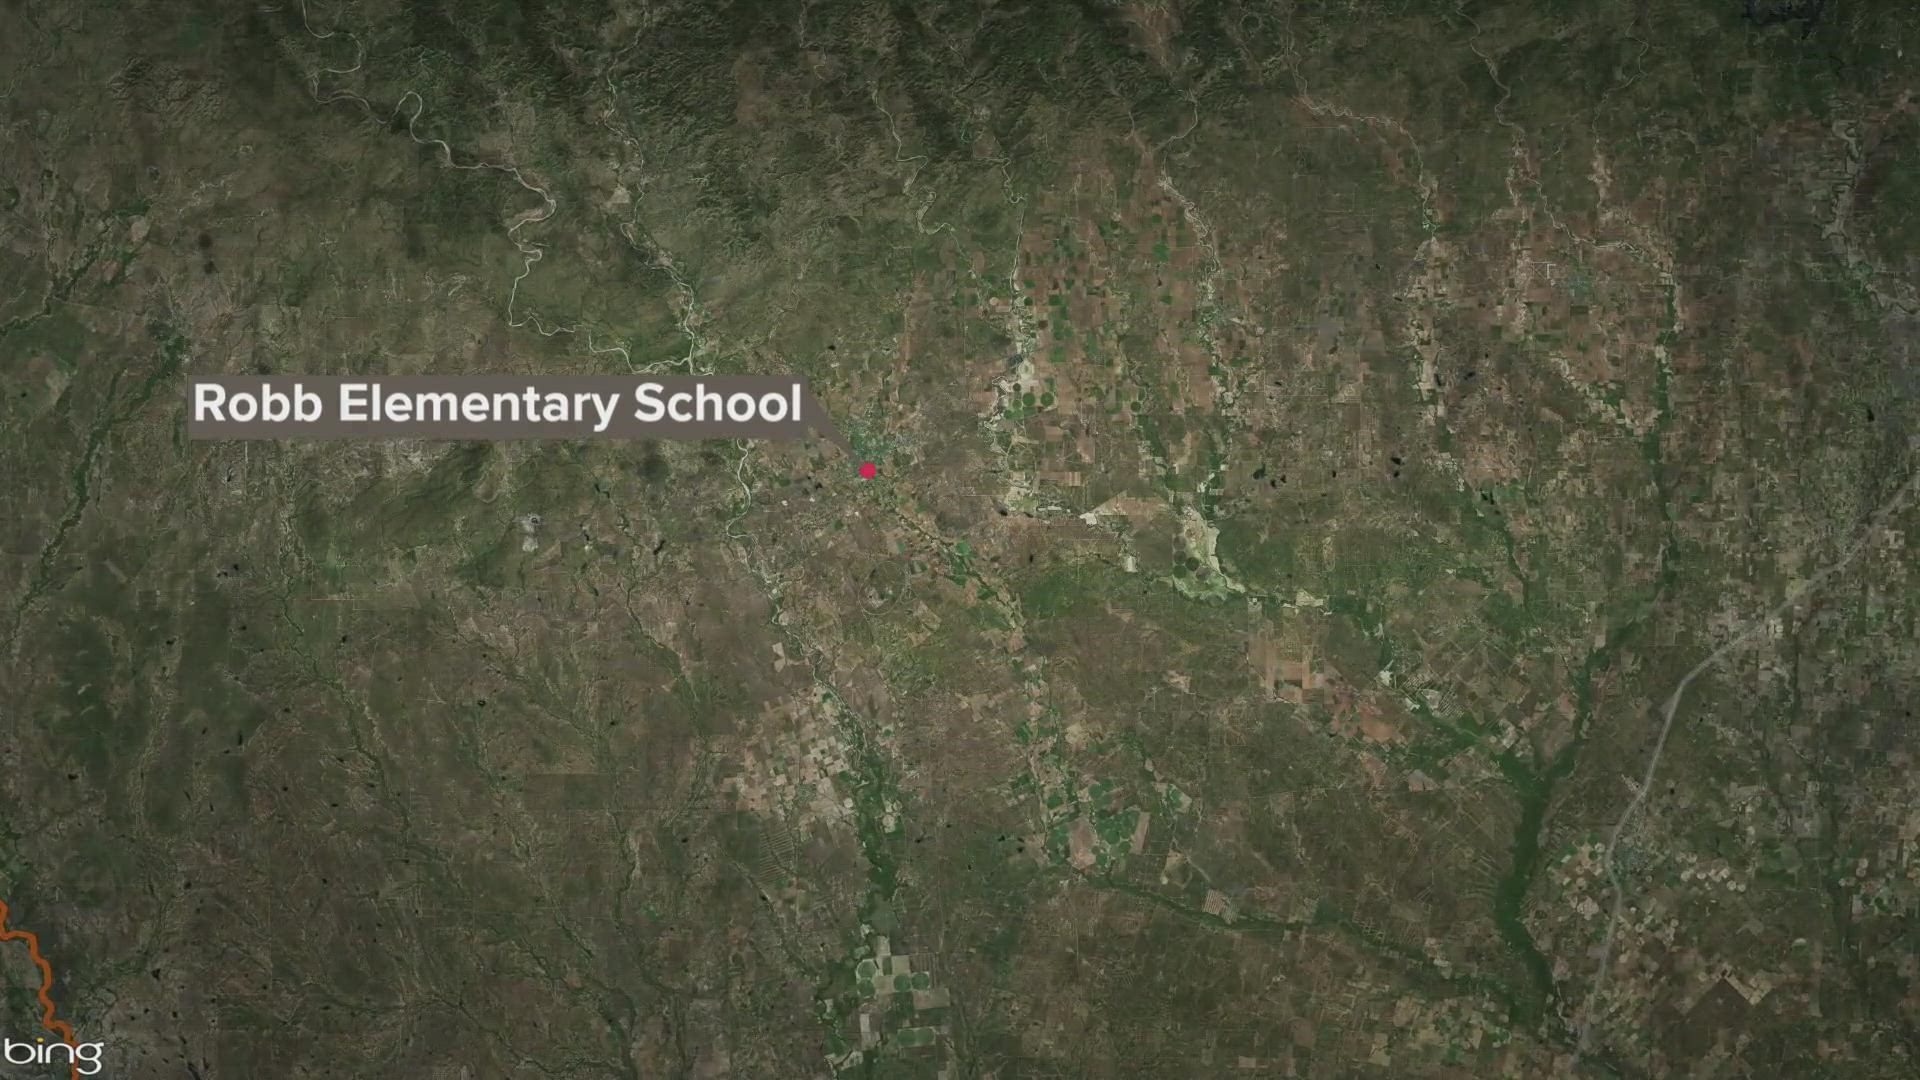 Map of Robb Elementary School in Uvalde ISD, where there are reports of an active shooter.